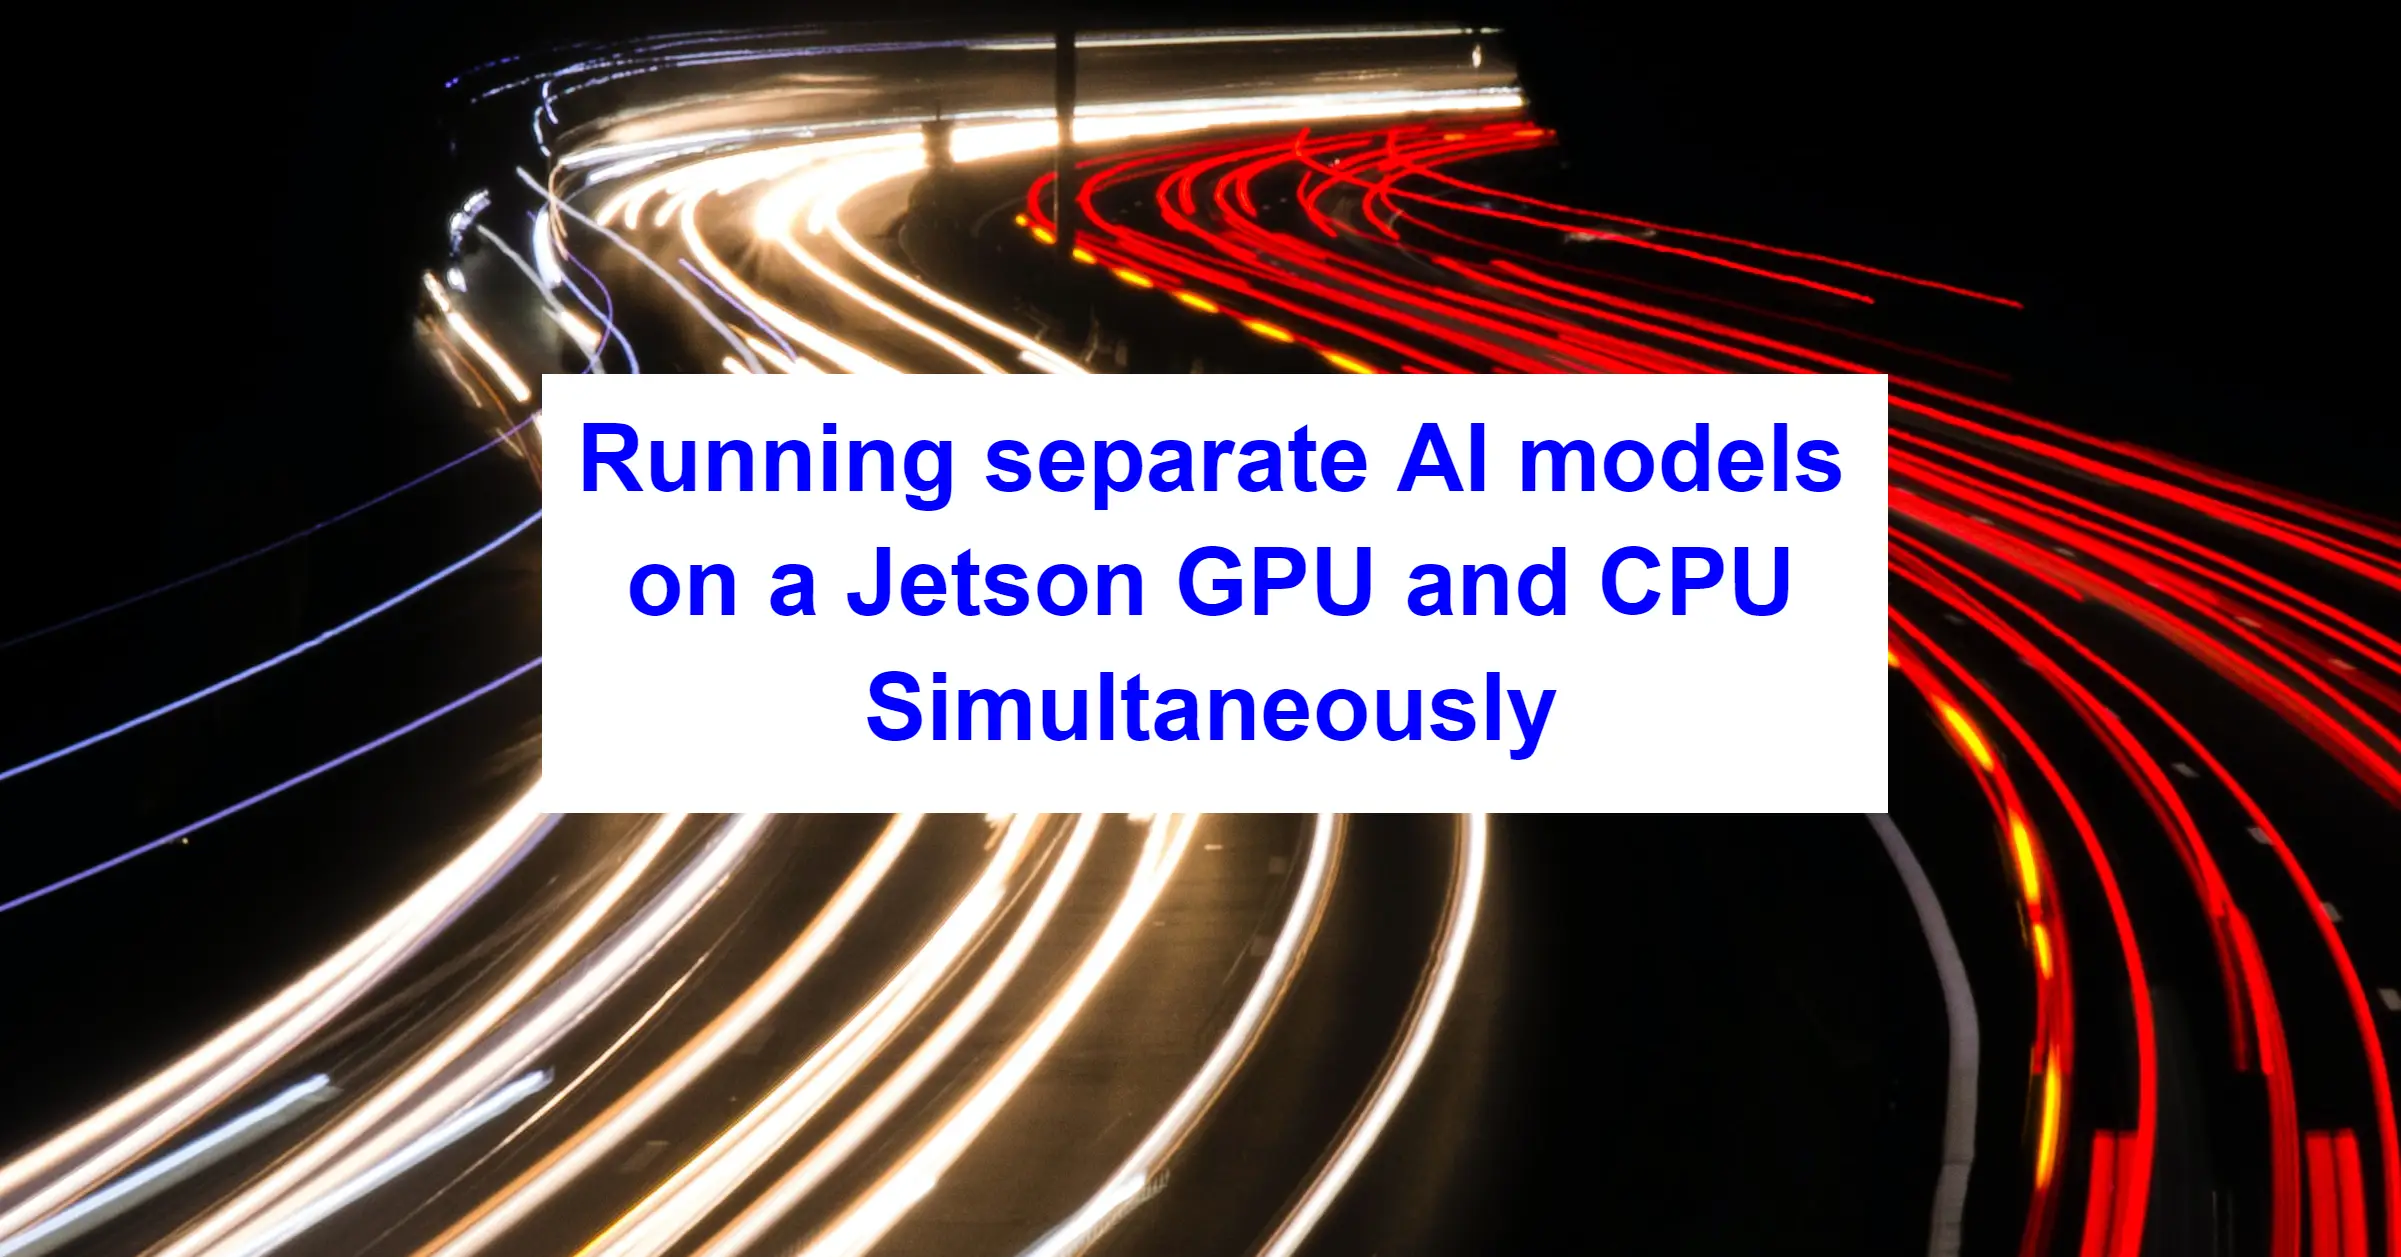 Running An AI Model On The Jetson GPU And CPU Simultaneously